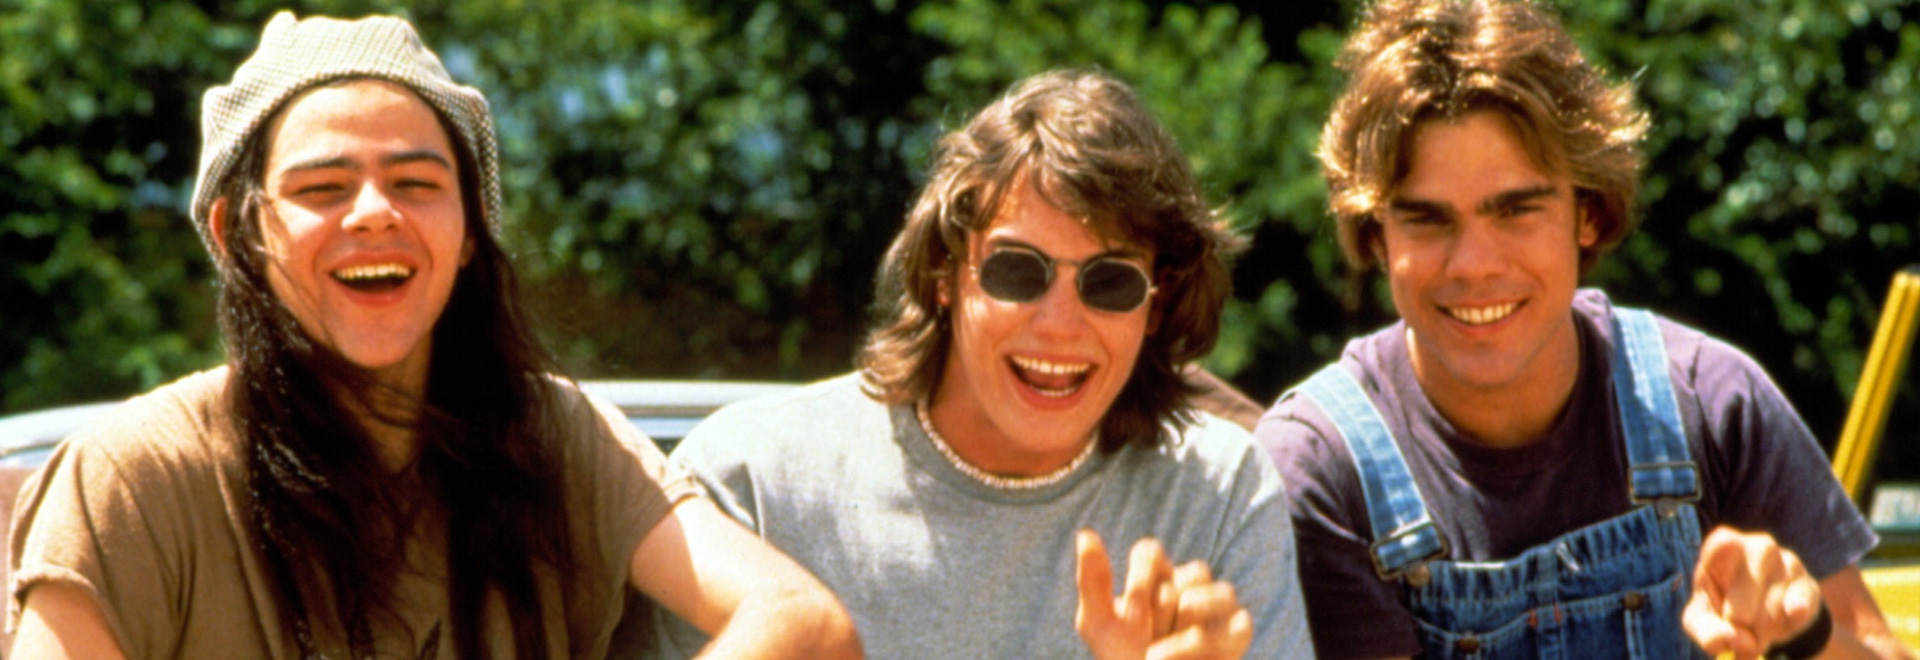 Get drunk, get laid, get in a fight - 25 years of 'Dazed and Confused'